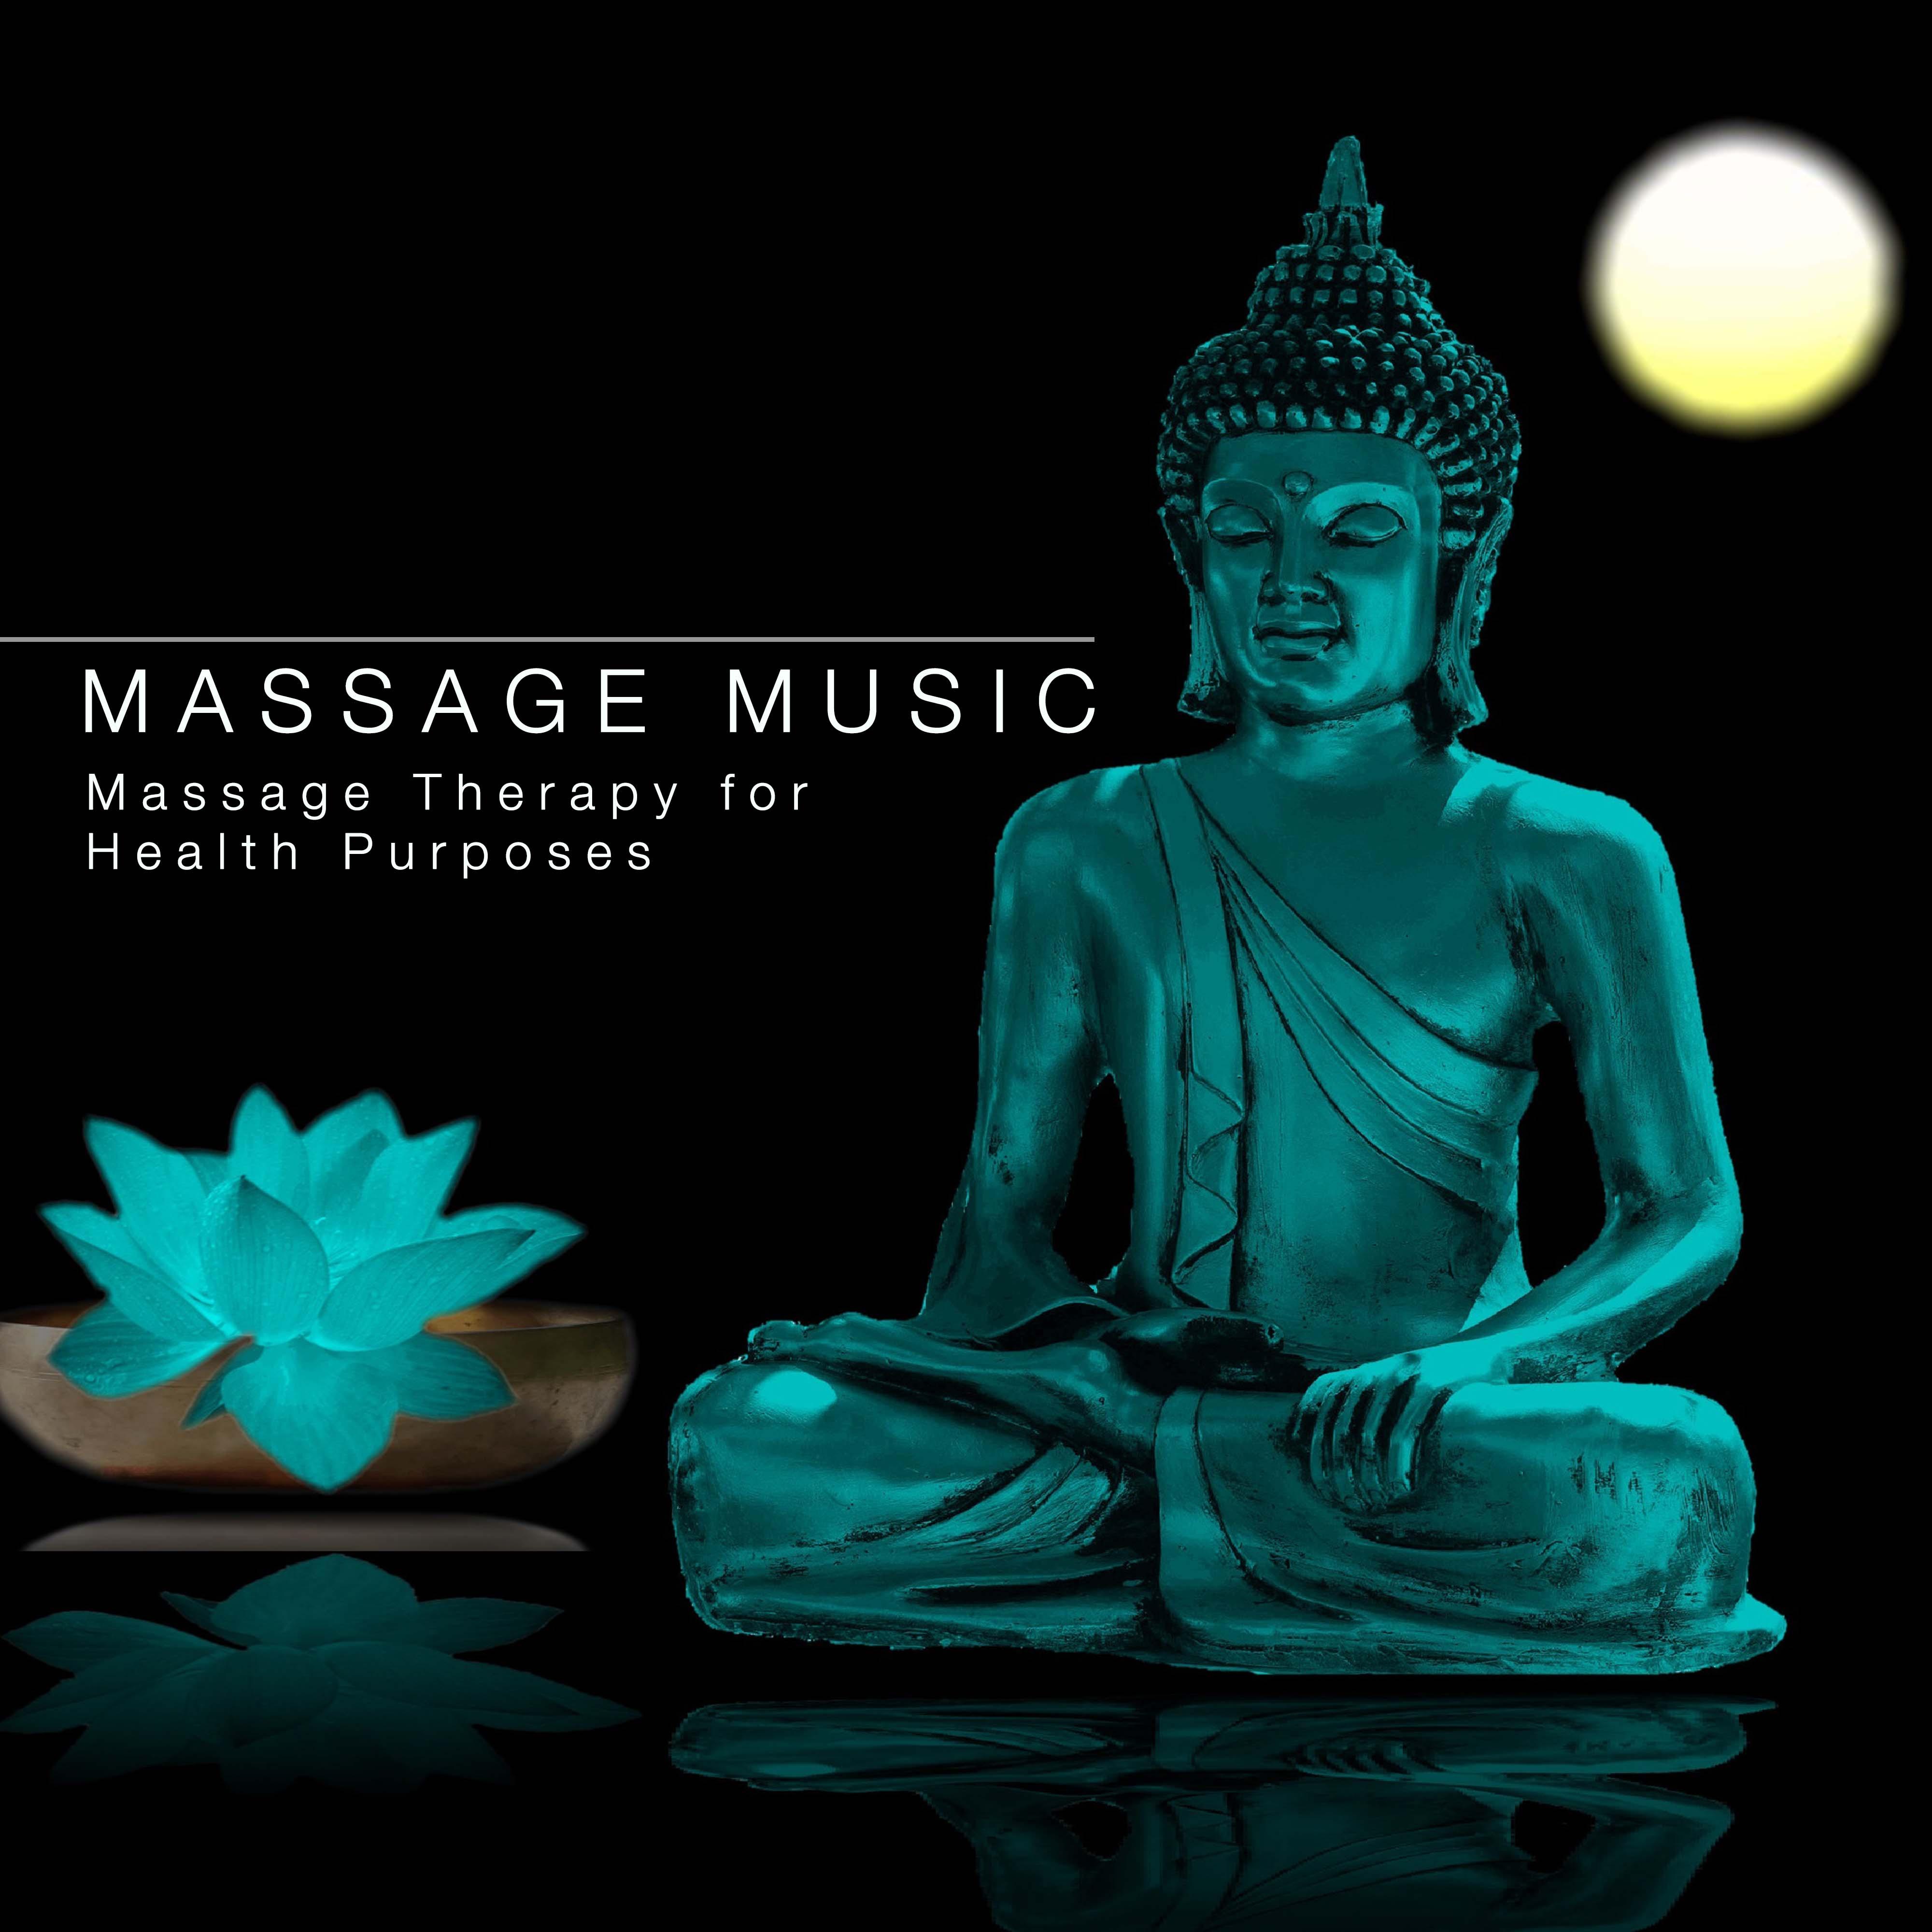 Massage Music: Massage Therapy for Health Purposes